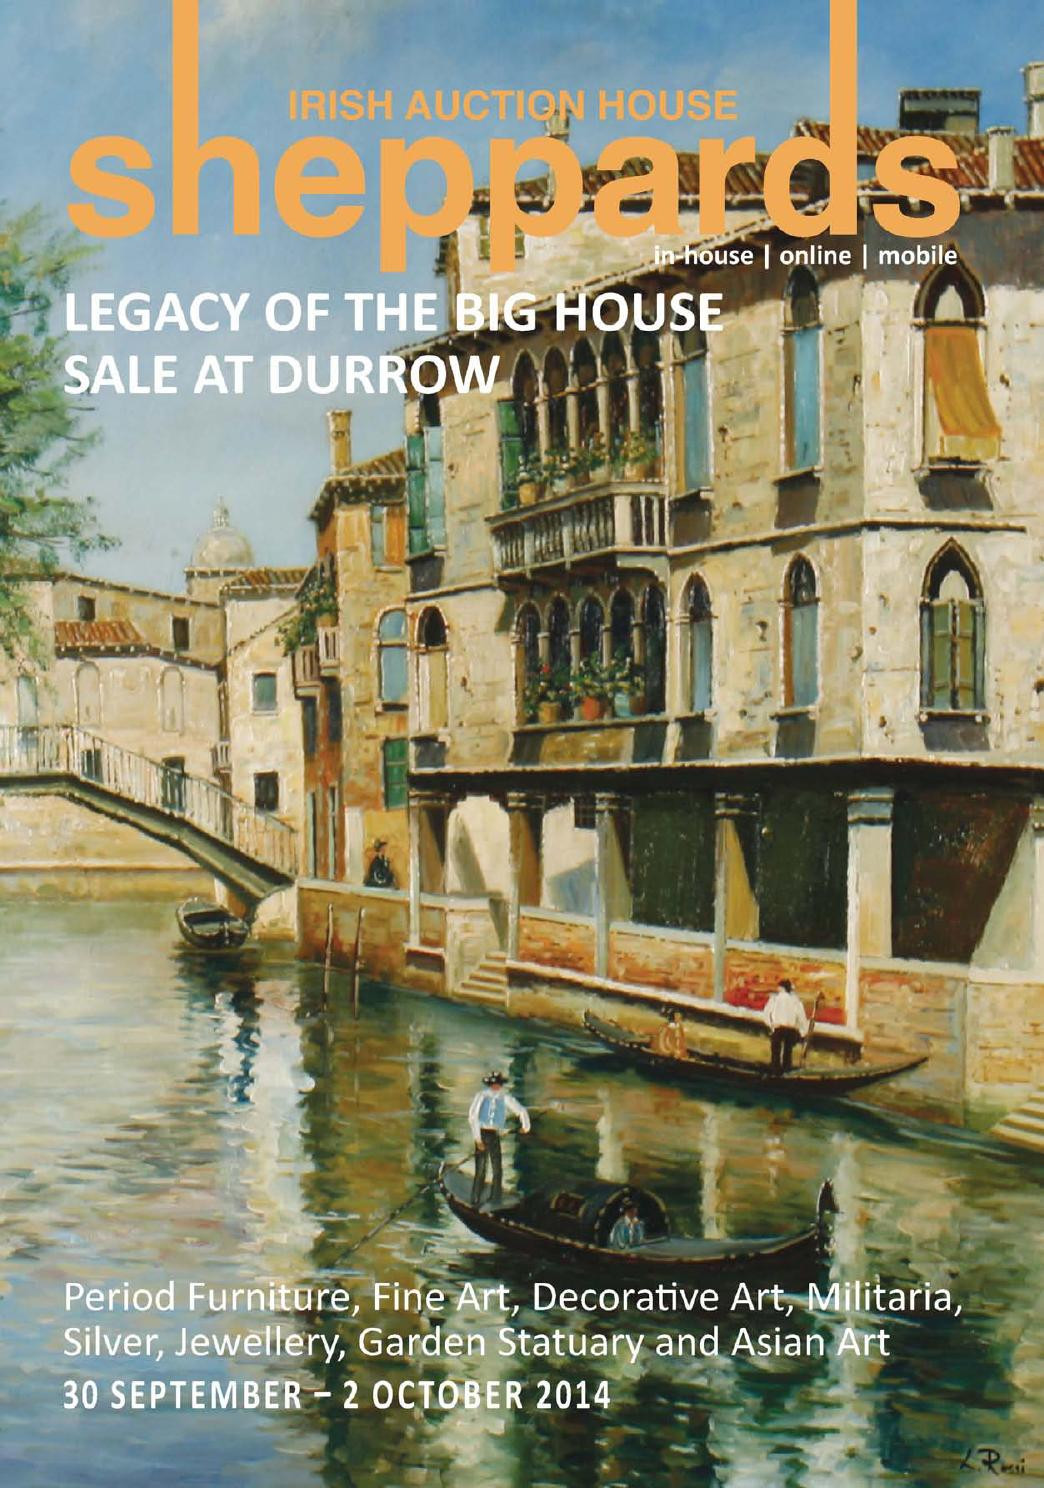 27 Amazing Waterford Balmoral 10 Inch Vase 2024 free download waterford balmoral 10 inch vase of legacy of the big house at durrow by sheppards irish auction house within legacy of the big house at durrow by sheppards irish auction house issuu